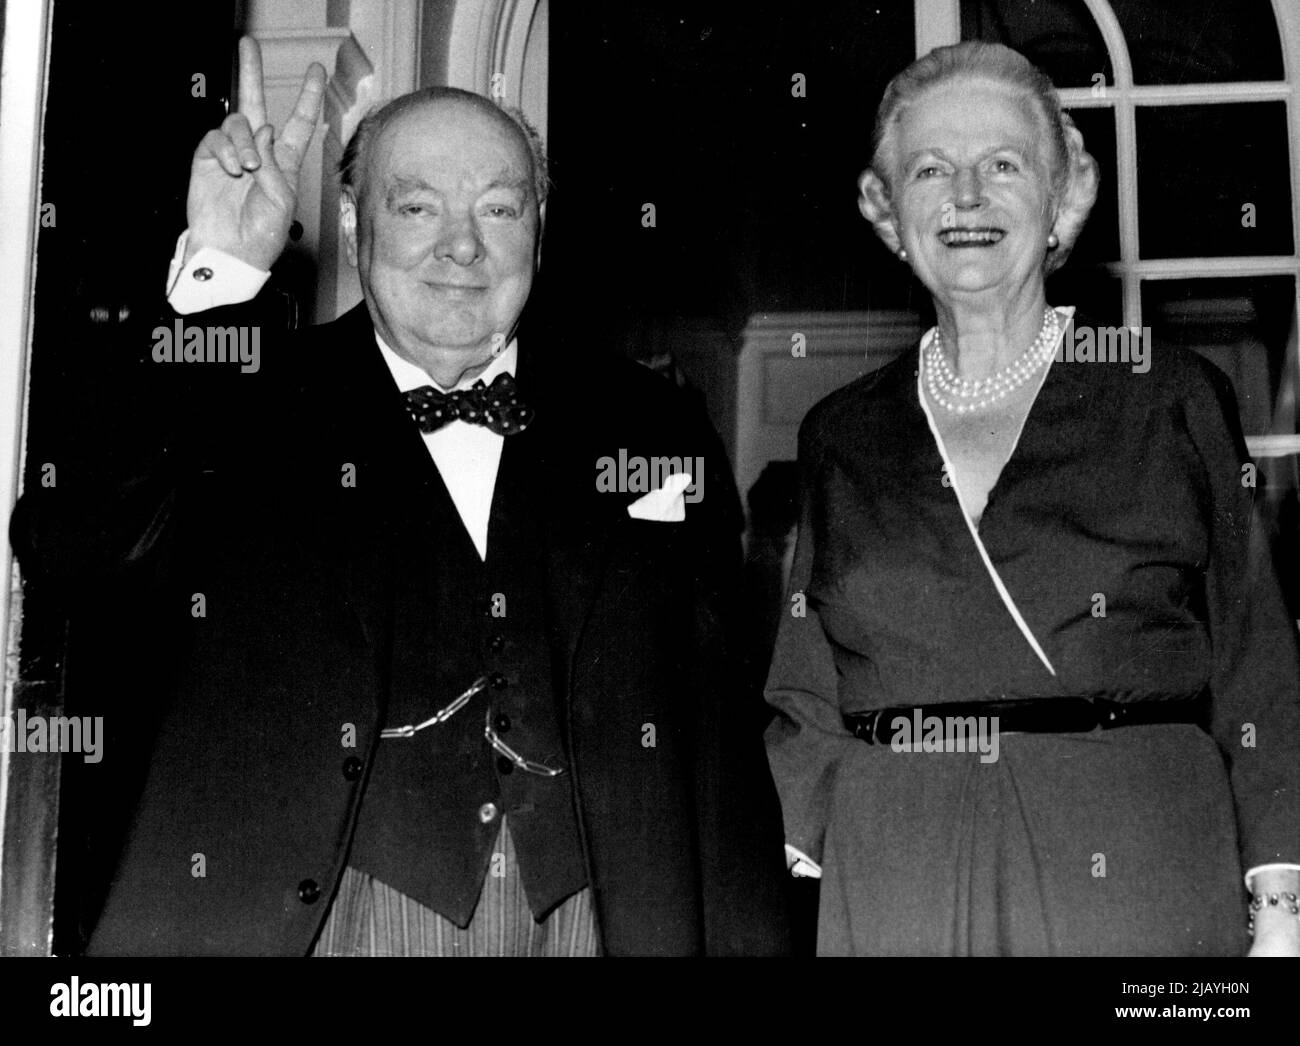 Sir Winston Churchill, celebrating his 81st birthday Anniversary today November 30, makes the 'V' sign as he poses with his life at the door of their London residence at Hyde Park Gate. November 30, 1955. (Photo by Associated Press Photo). Stock Photo